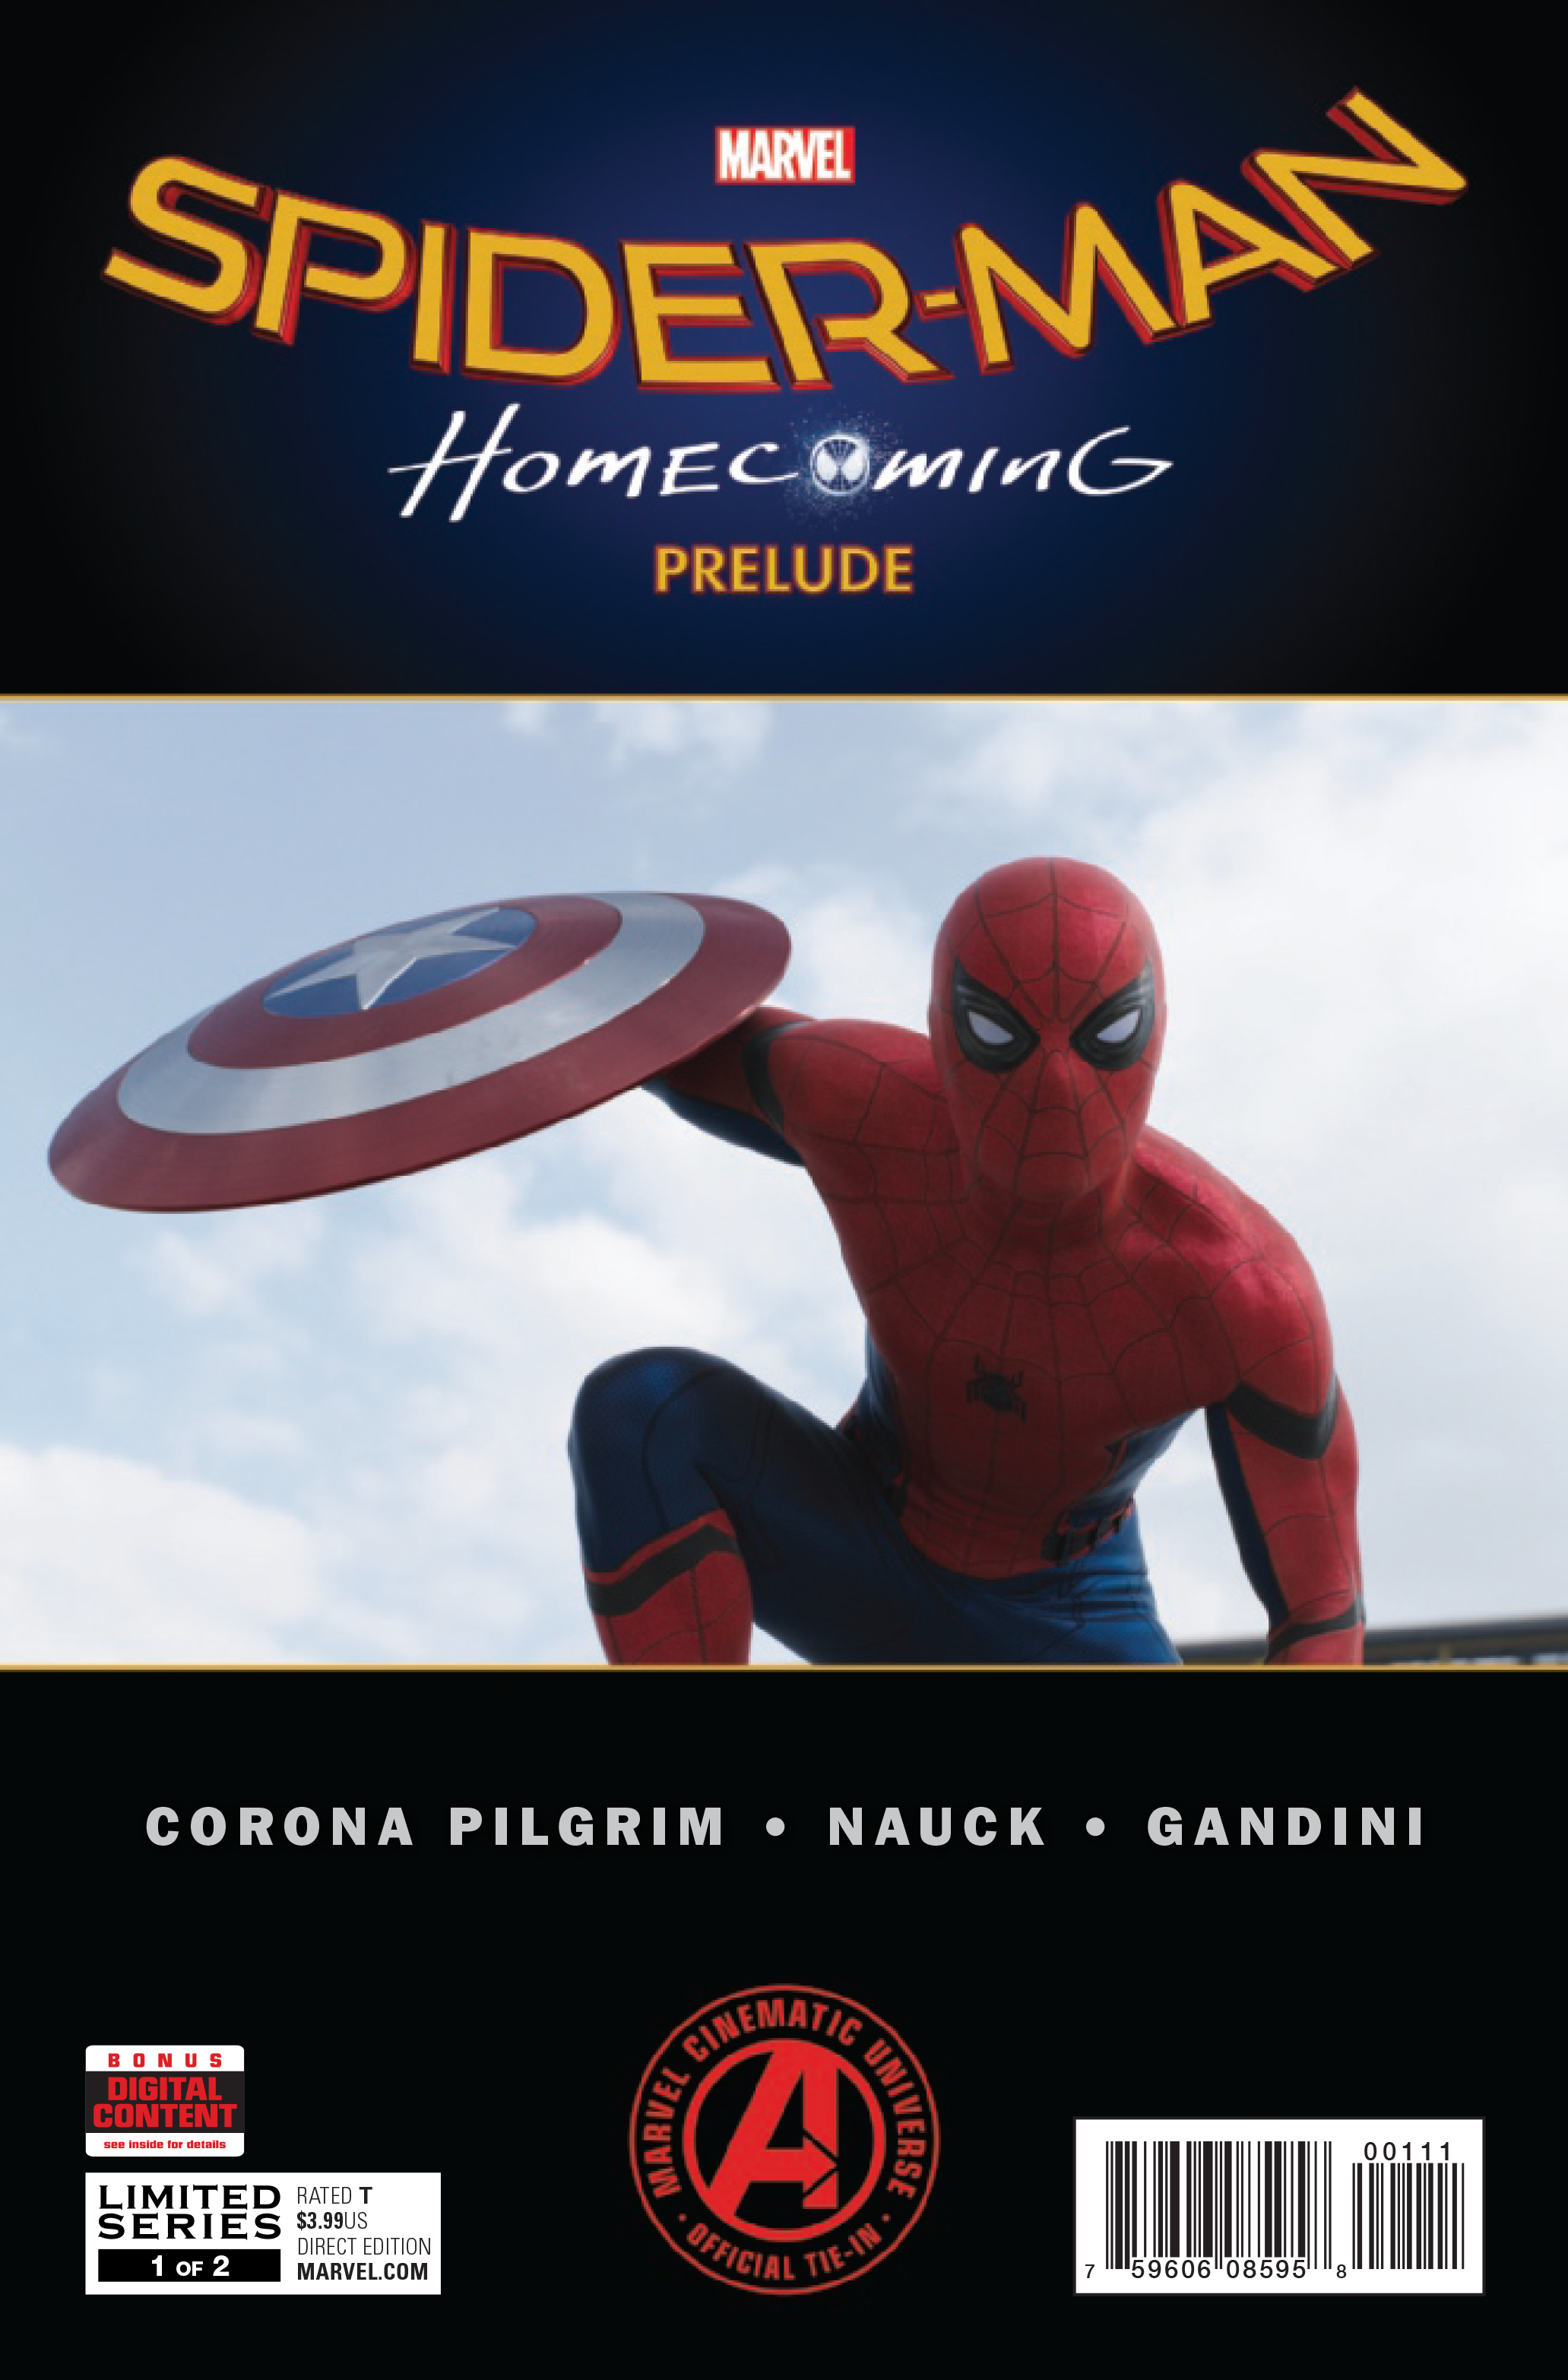 SPIDER-MAN HOMECOMING PRELUDE #1 (OF 2)